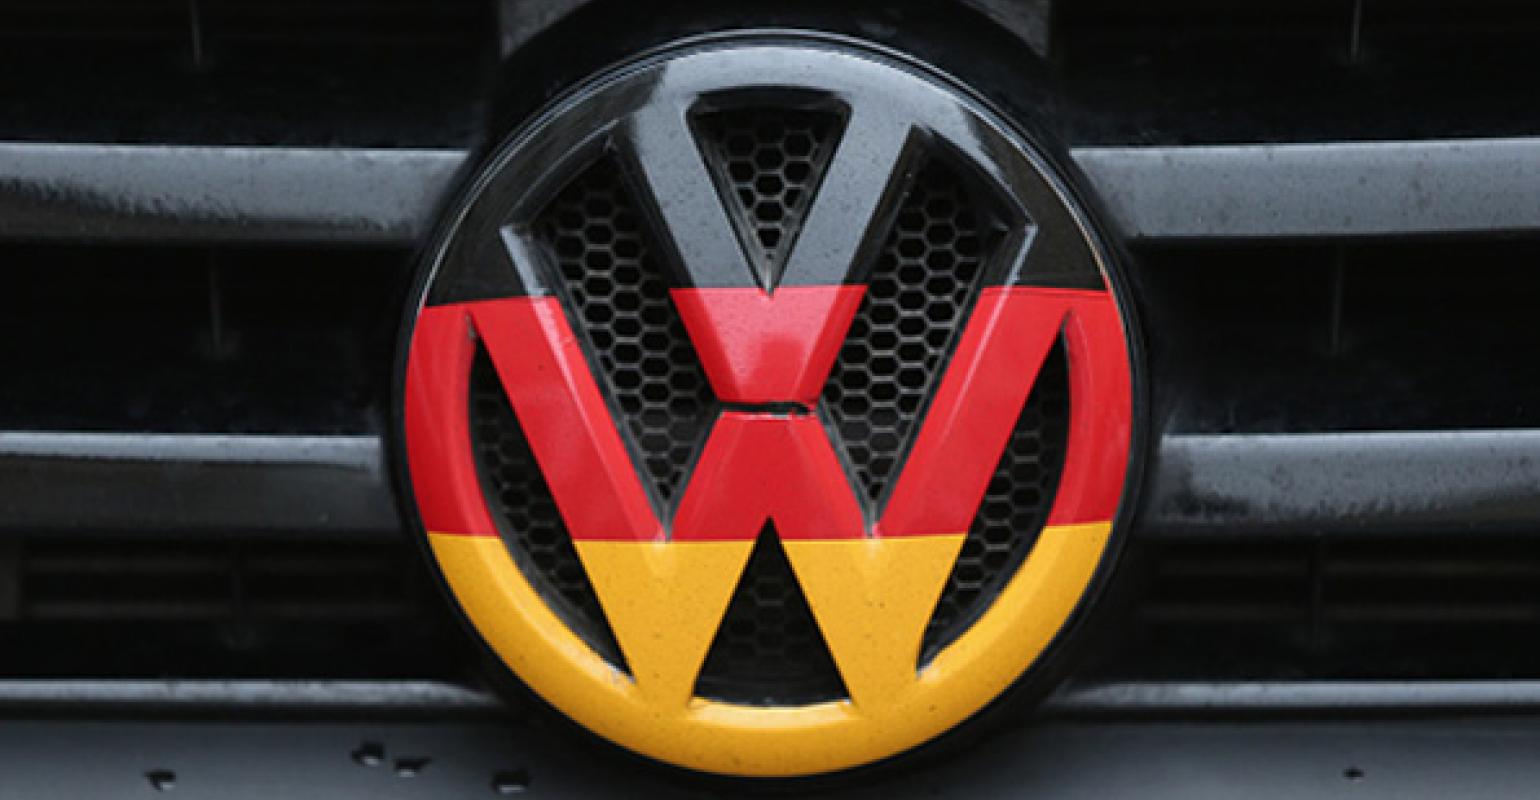 Volswagon Logo - Volkswagen Taking Action to Curb Future Oversights, Scandals ...